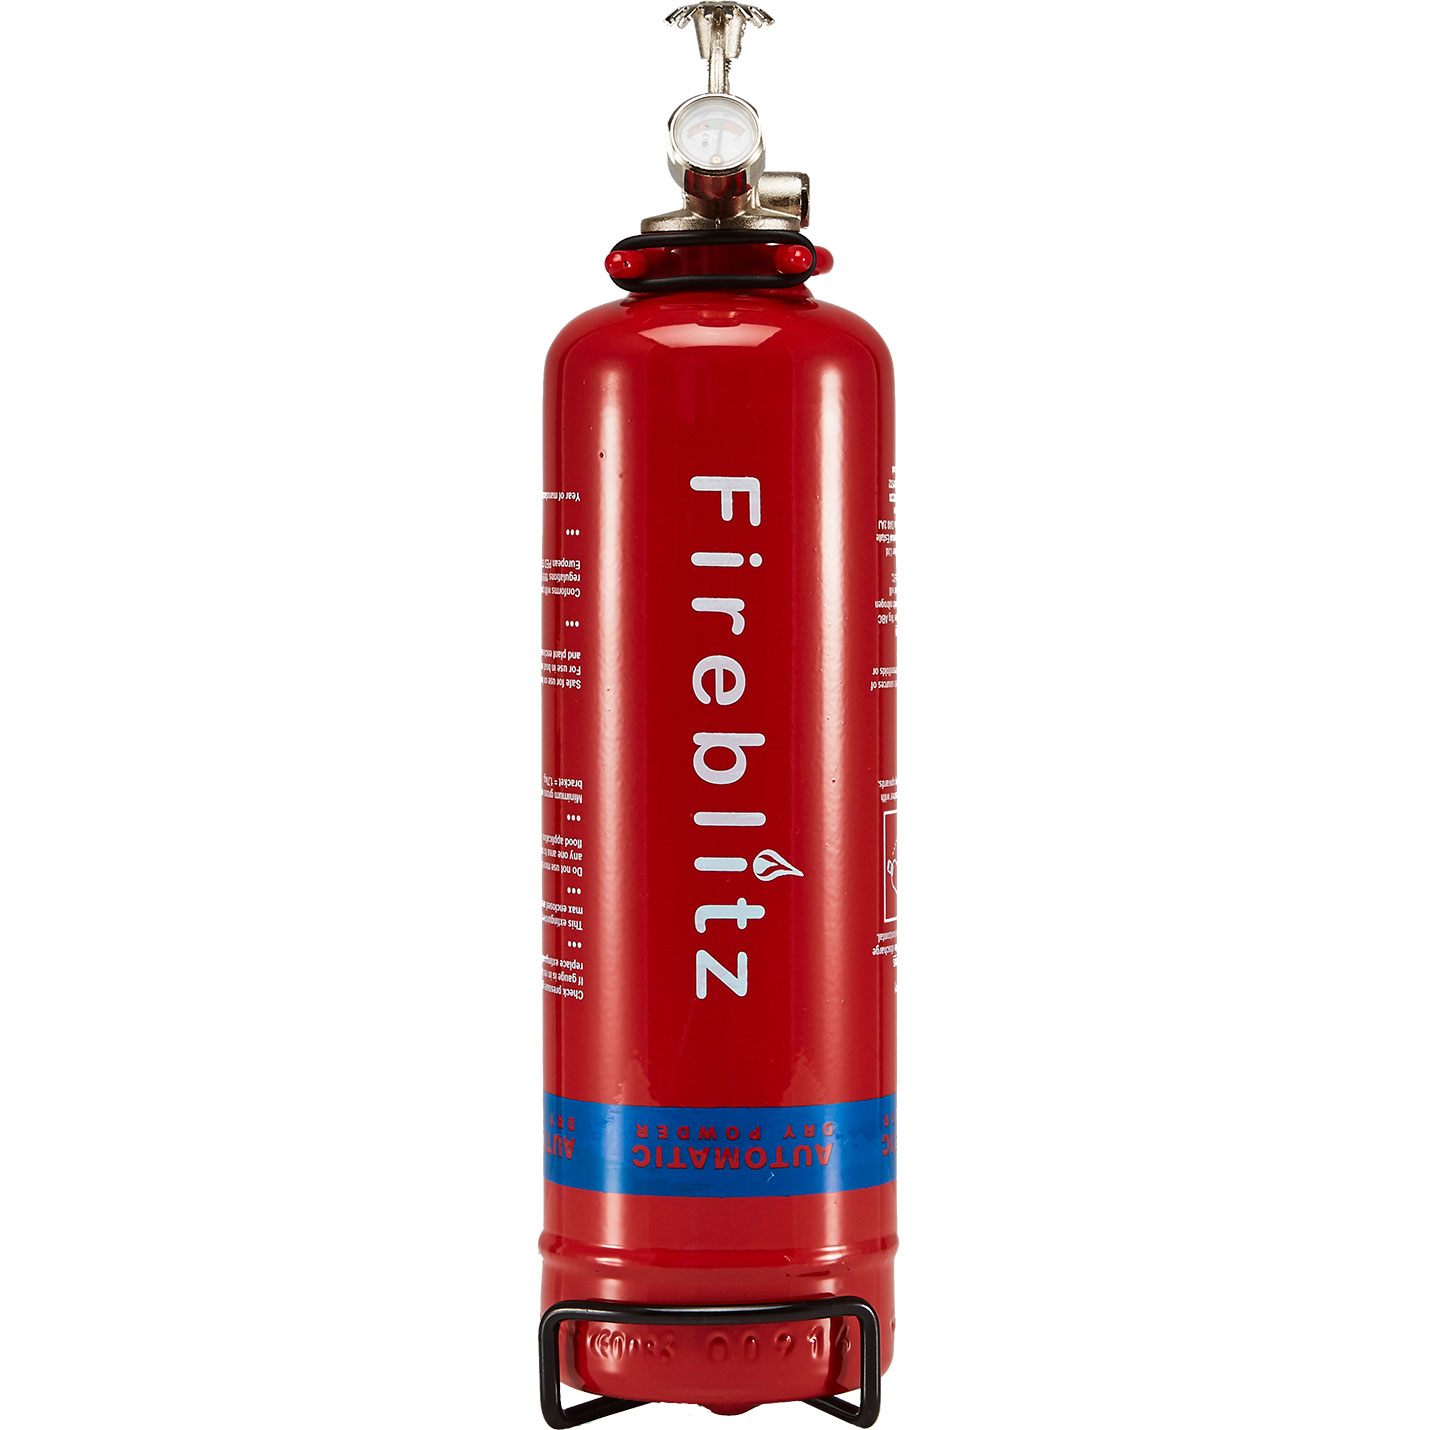 Fully Automatic Fire Extinguisher